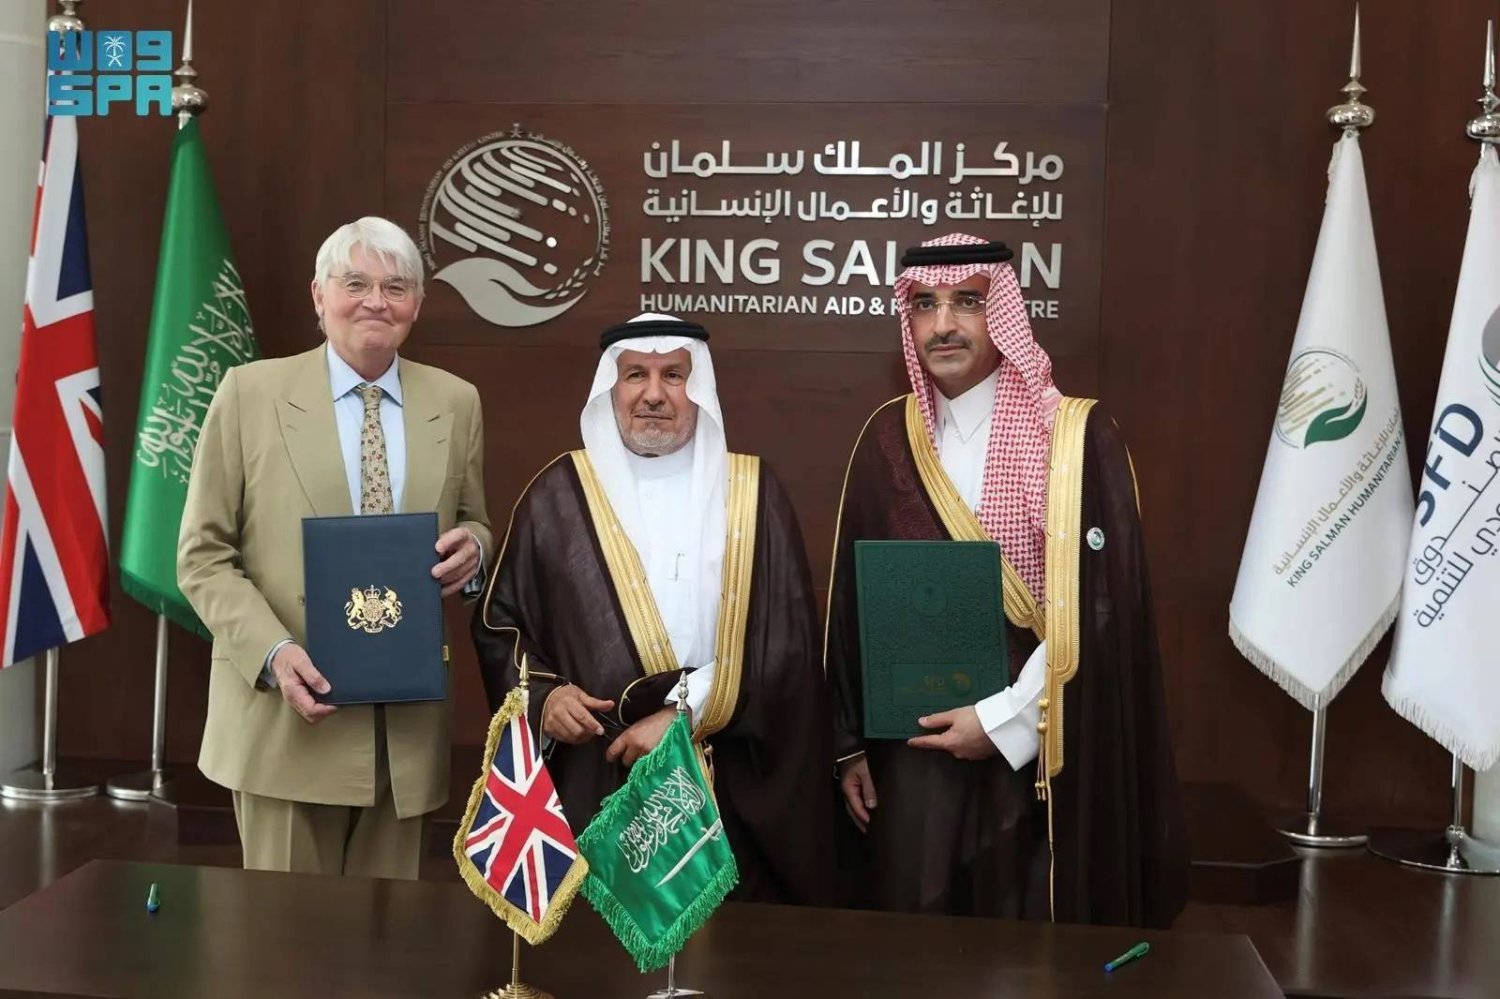 The Saudi Fund for Development (SFD) and UK’s Foreign, Commonwealth and Development Office (FCDO) signed in Riyadh on Monday a joint cooperation arrangement (JCA) to advance development and address policy issues of mutual concern. (SPA)